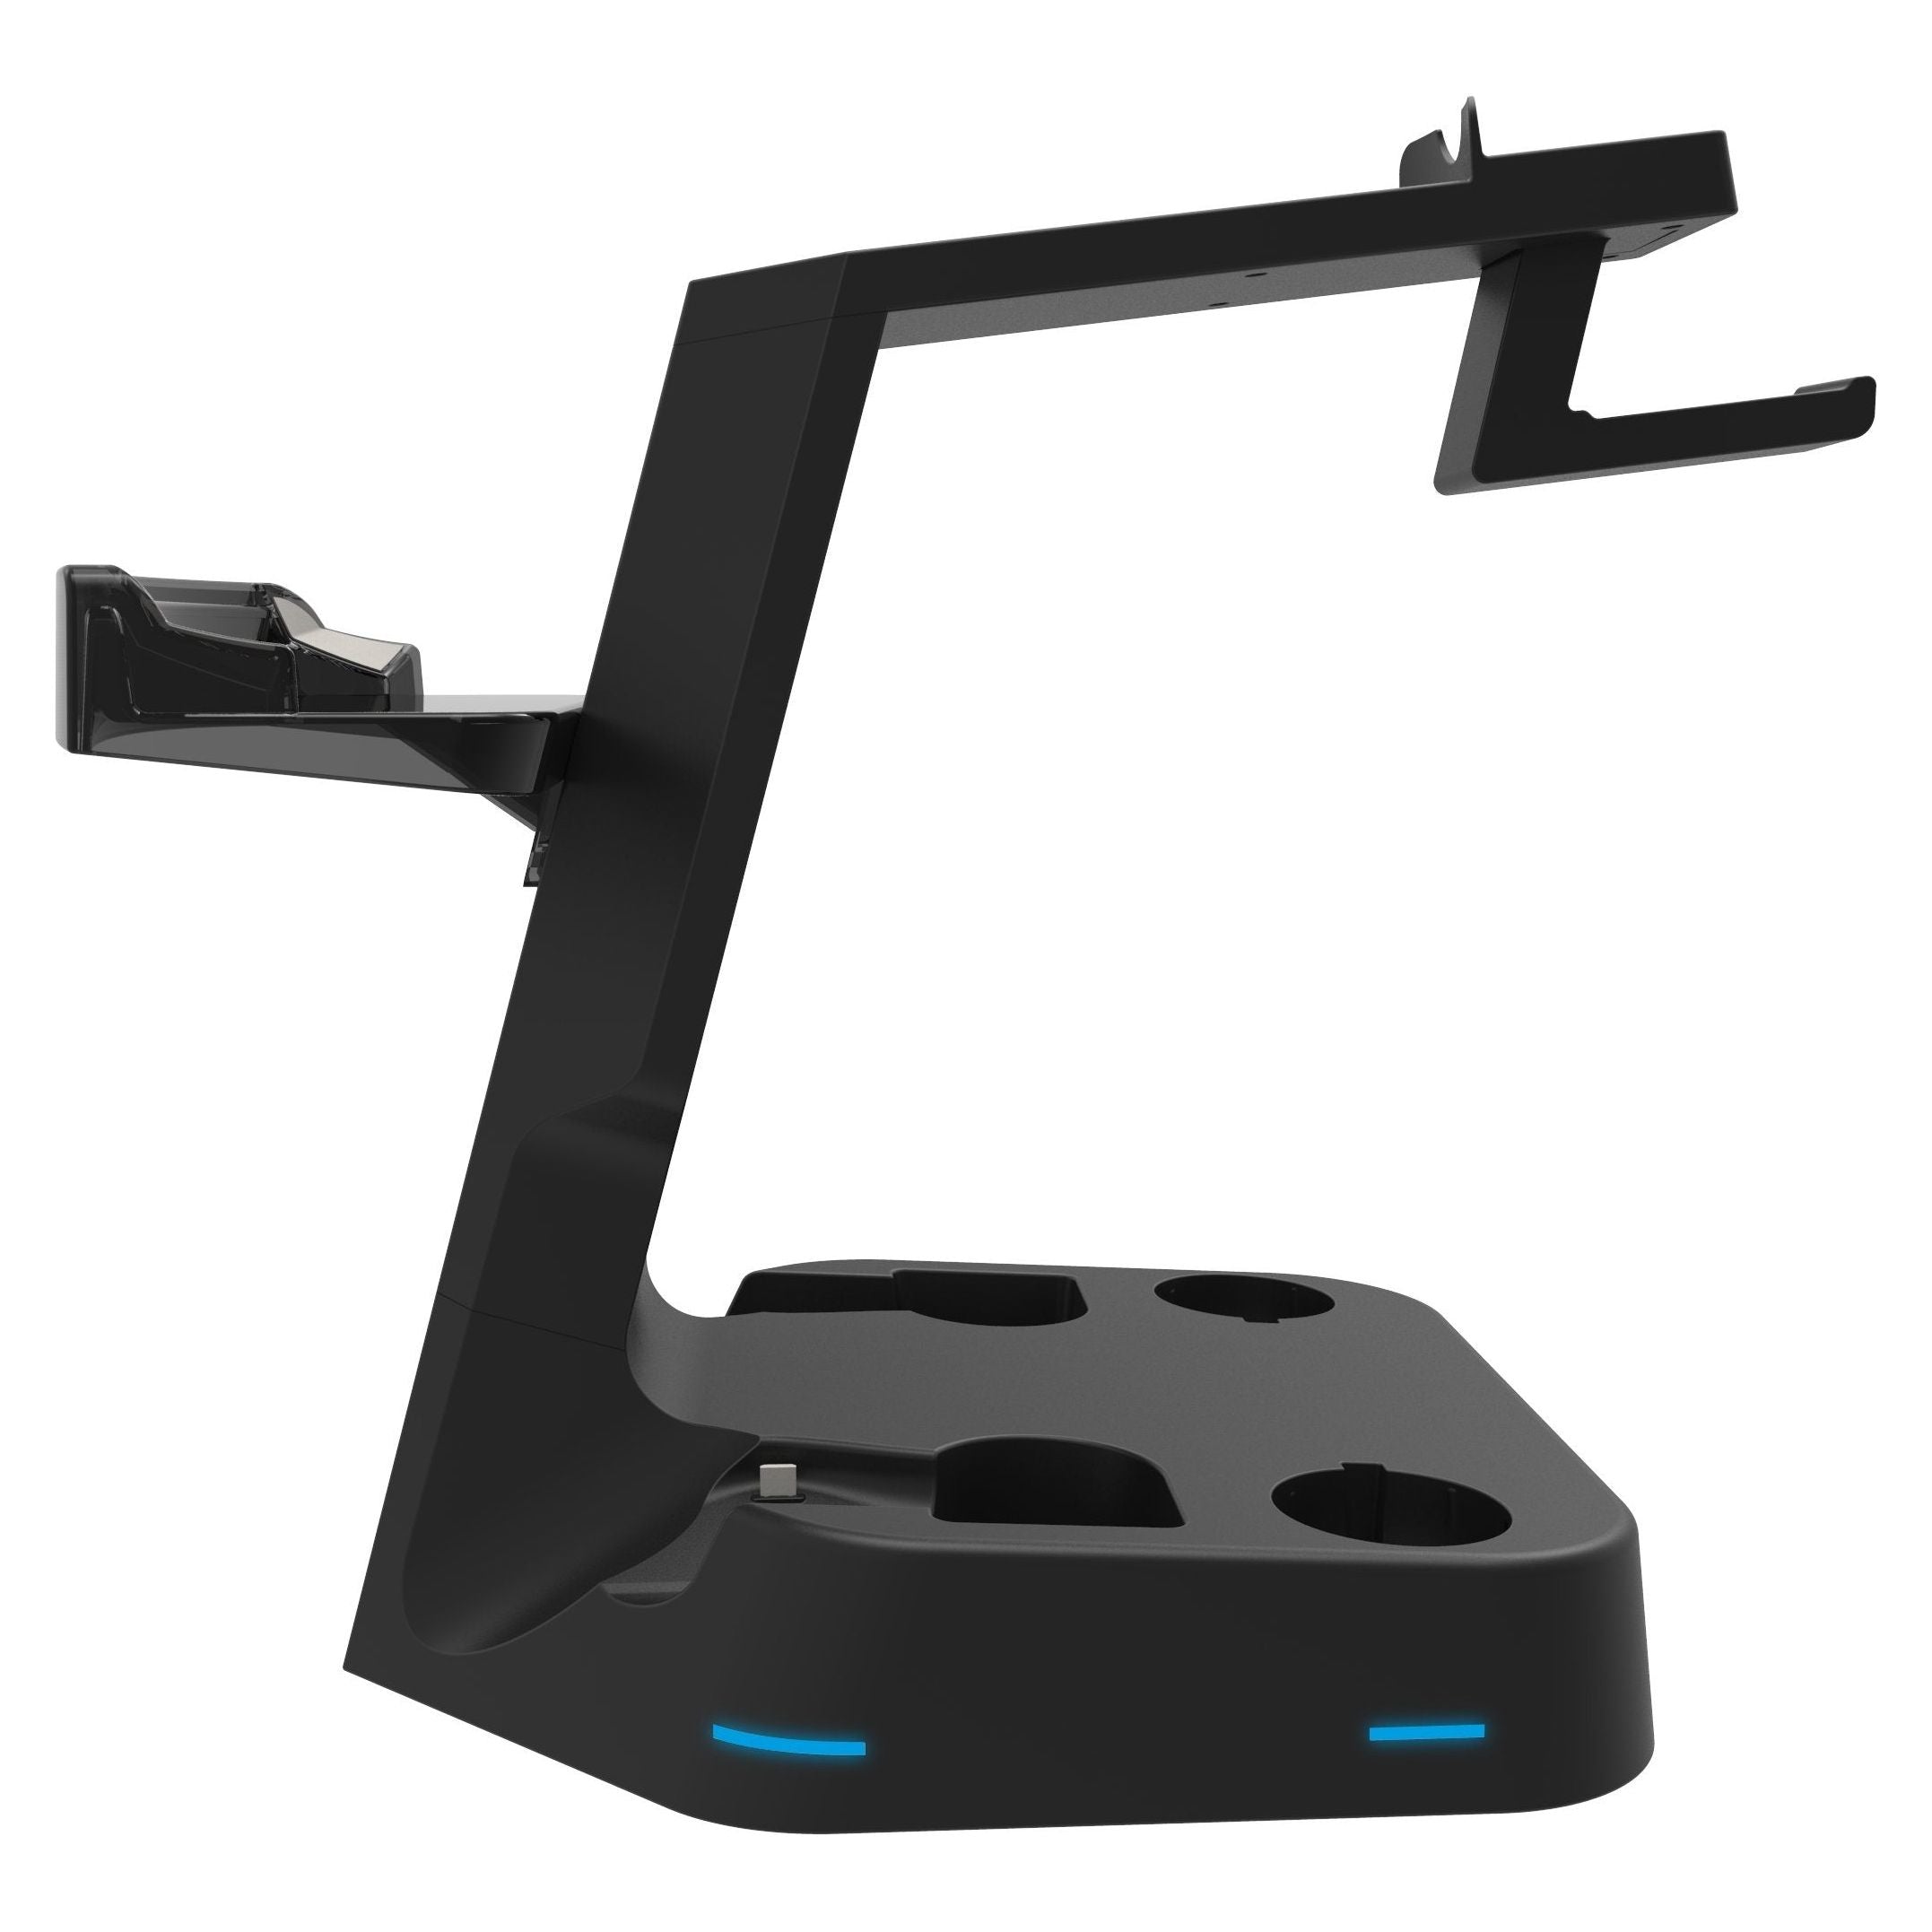 PlayStation VR Charging Station by Collective Minds